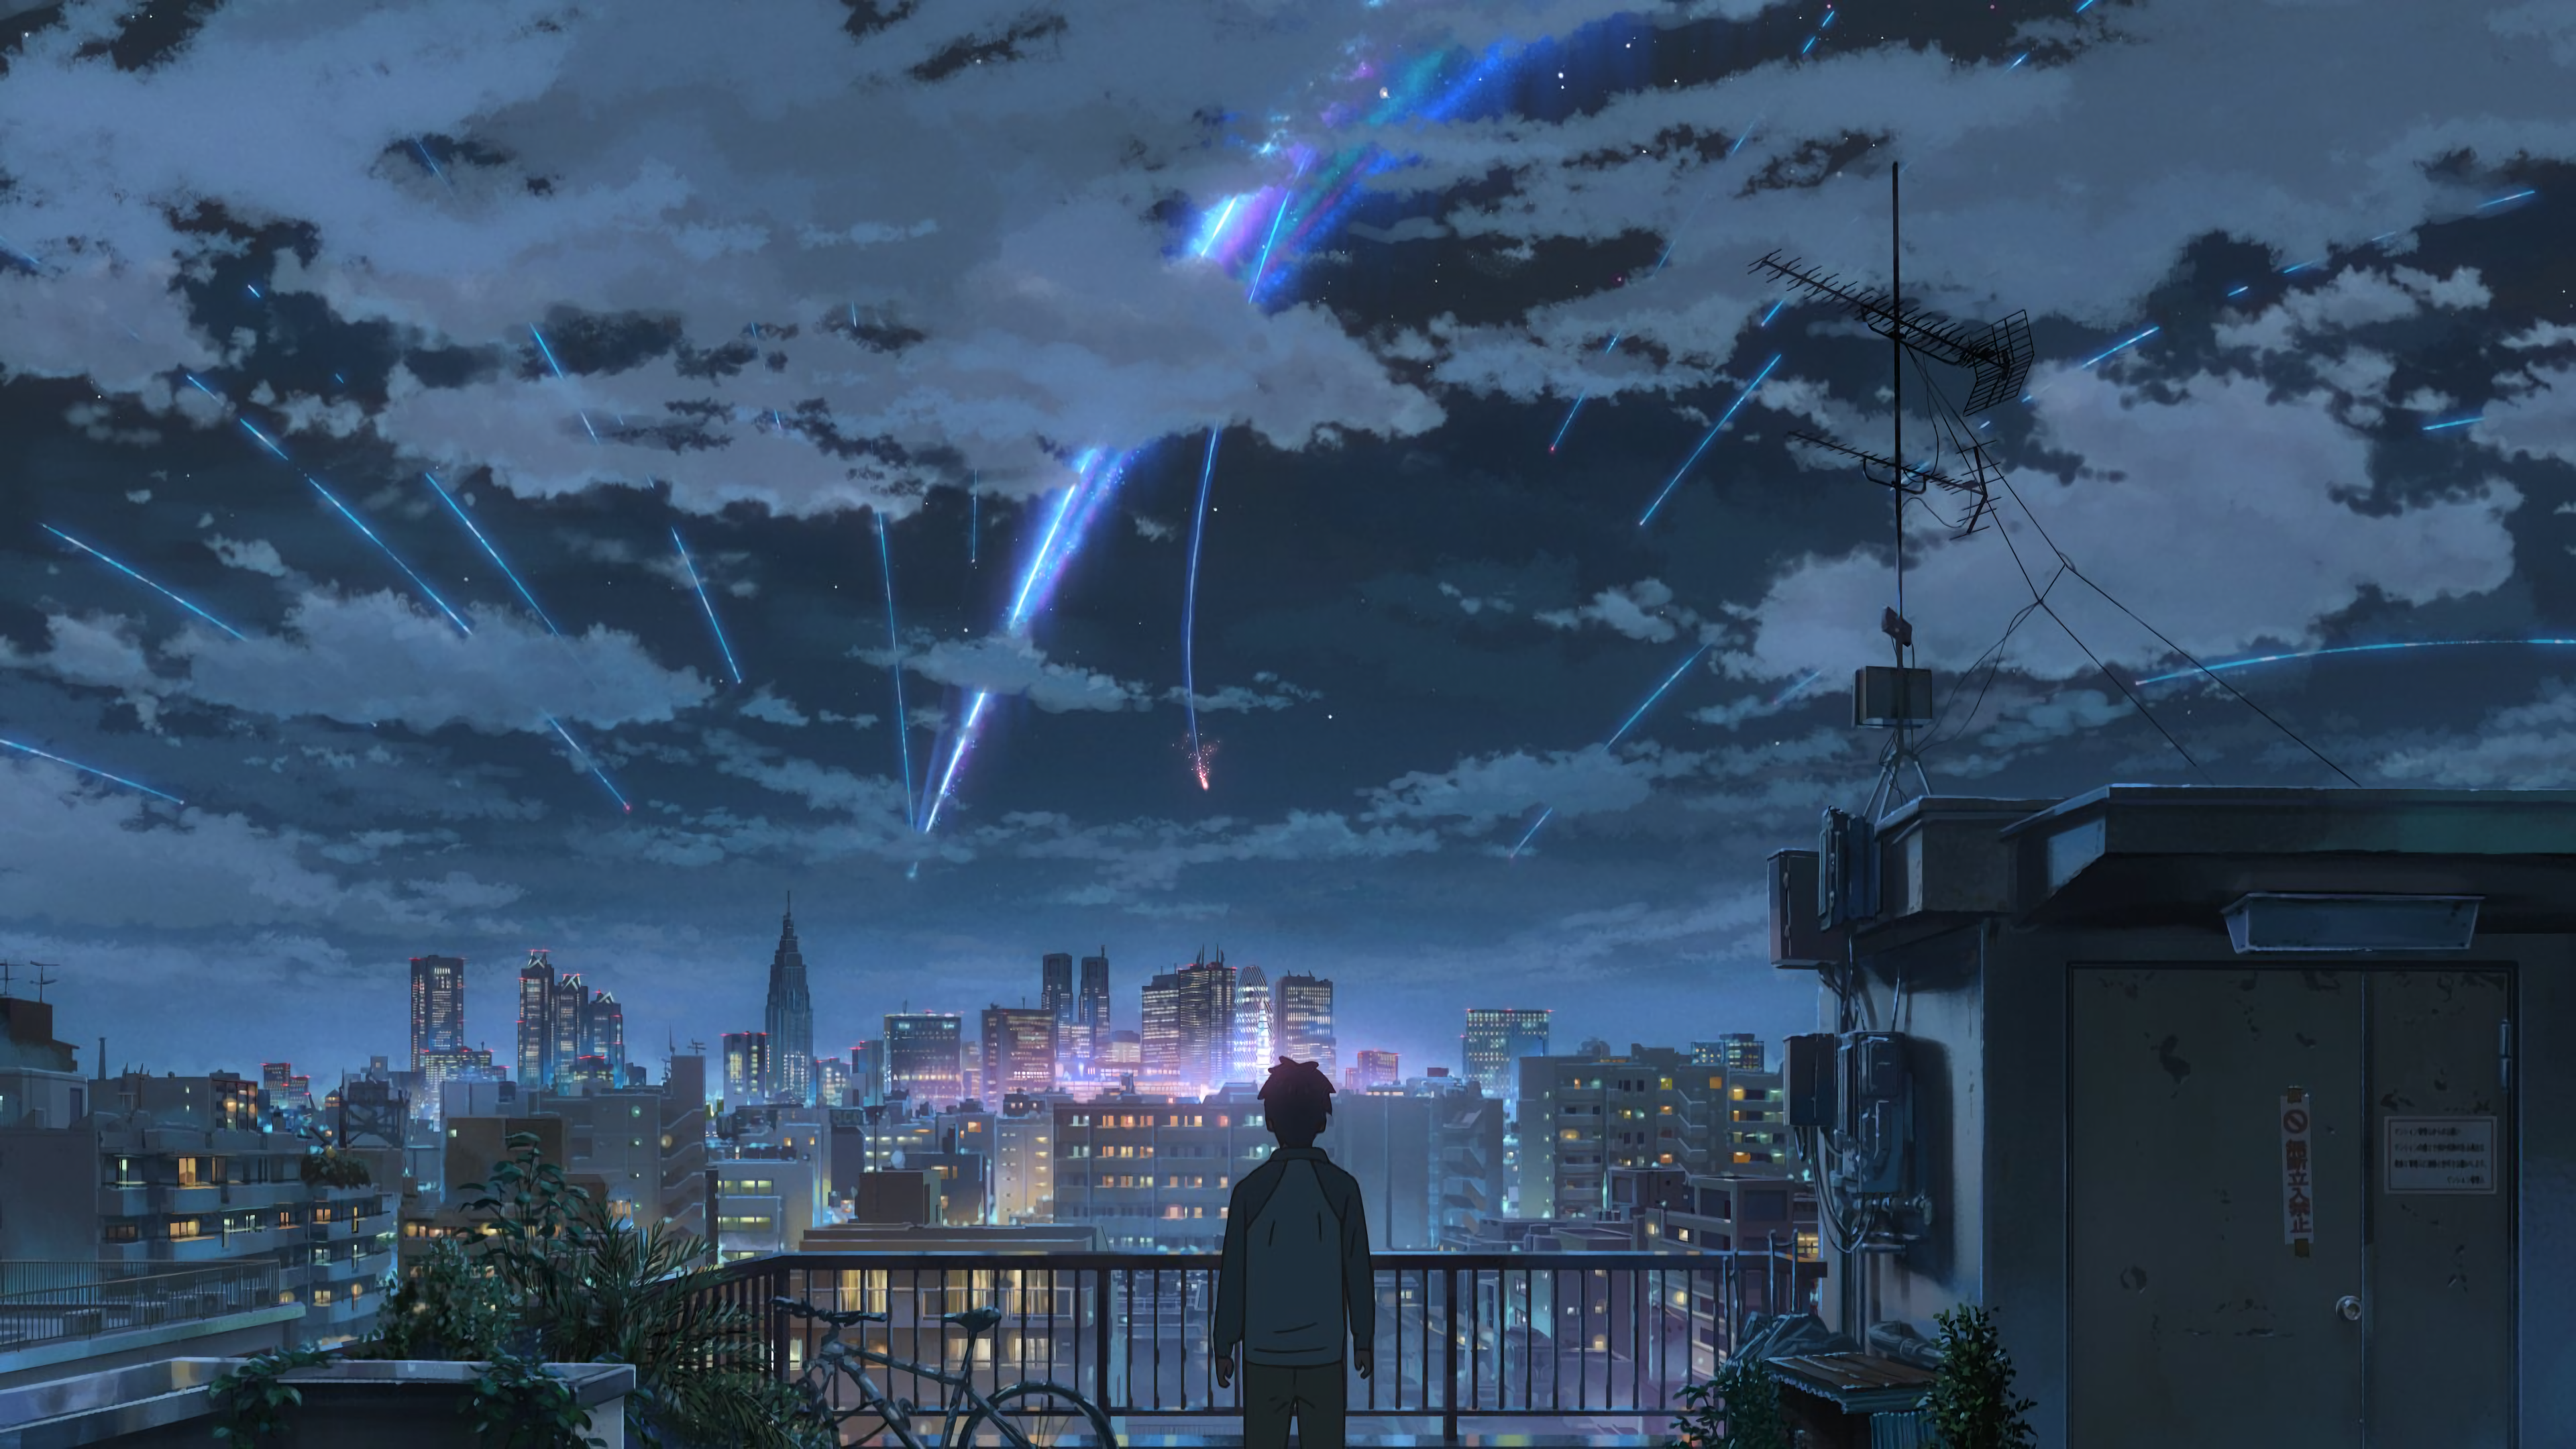 Your Name is the most exciting animated movie I've seen in years, by Alex  Tolkin